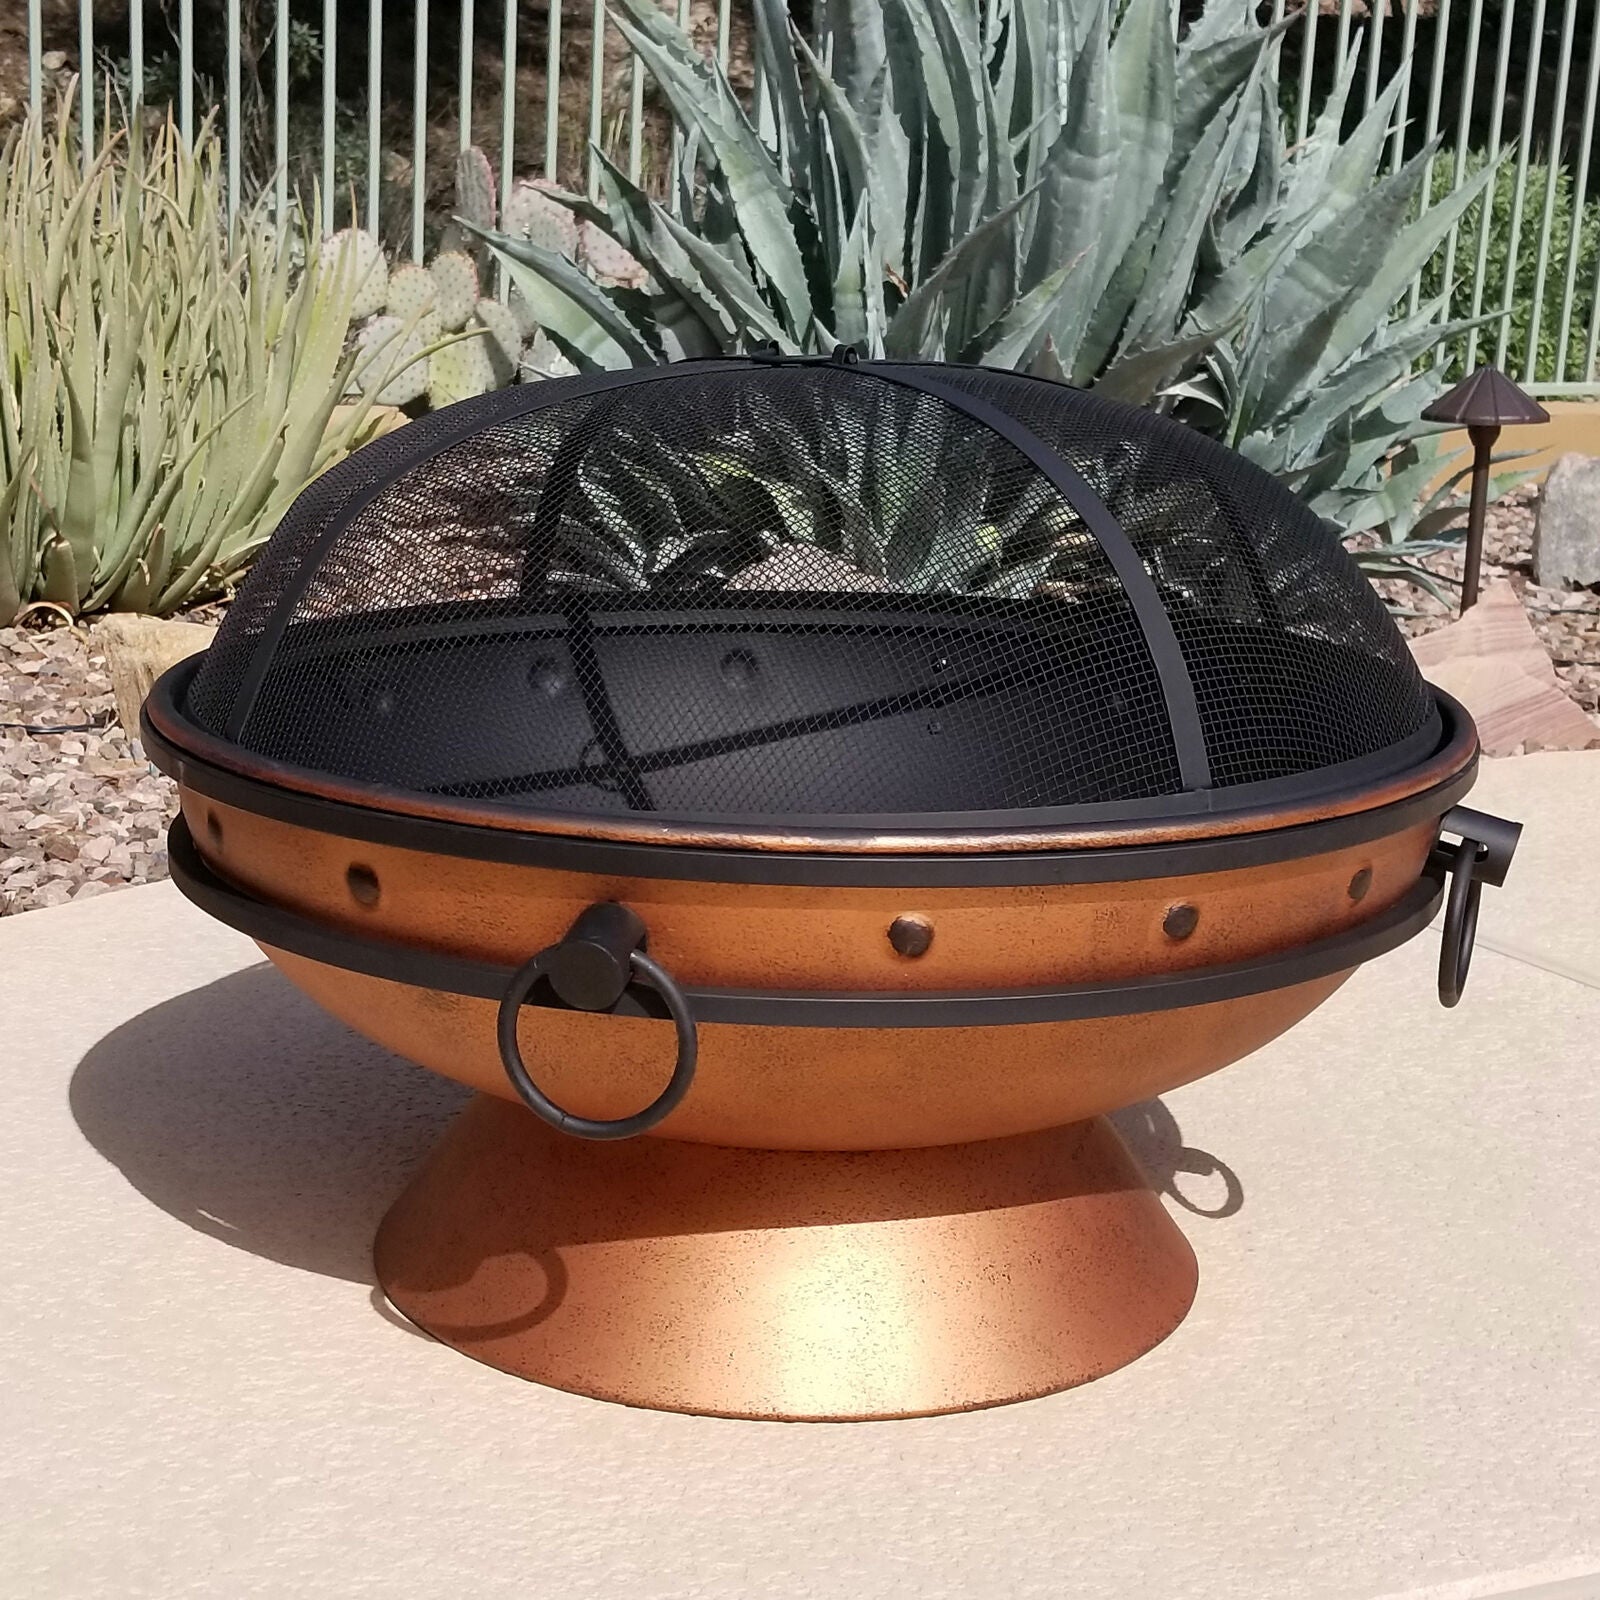 Large Compact Tabletop Fire Pit Bowl